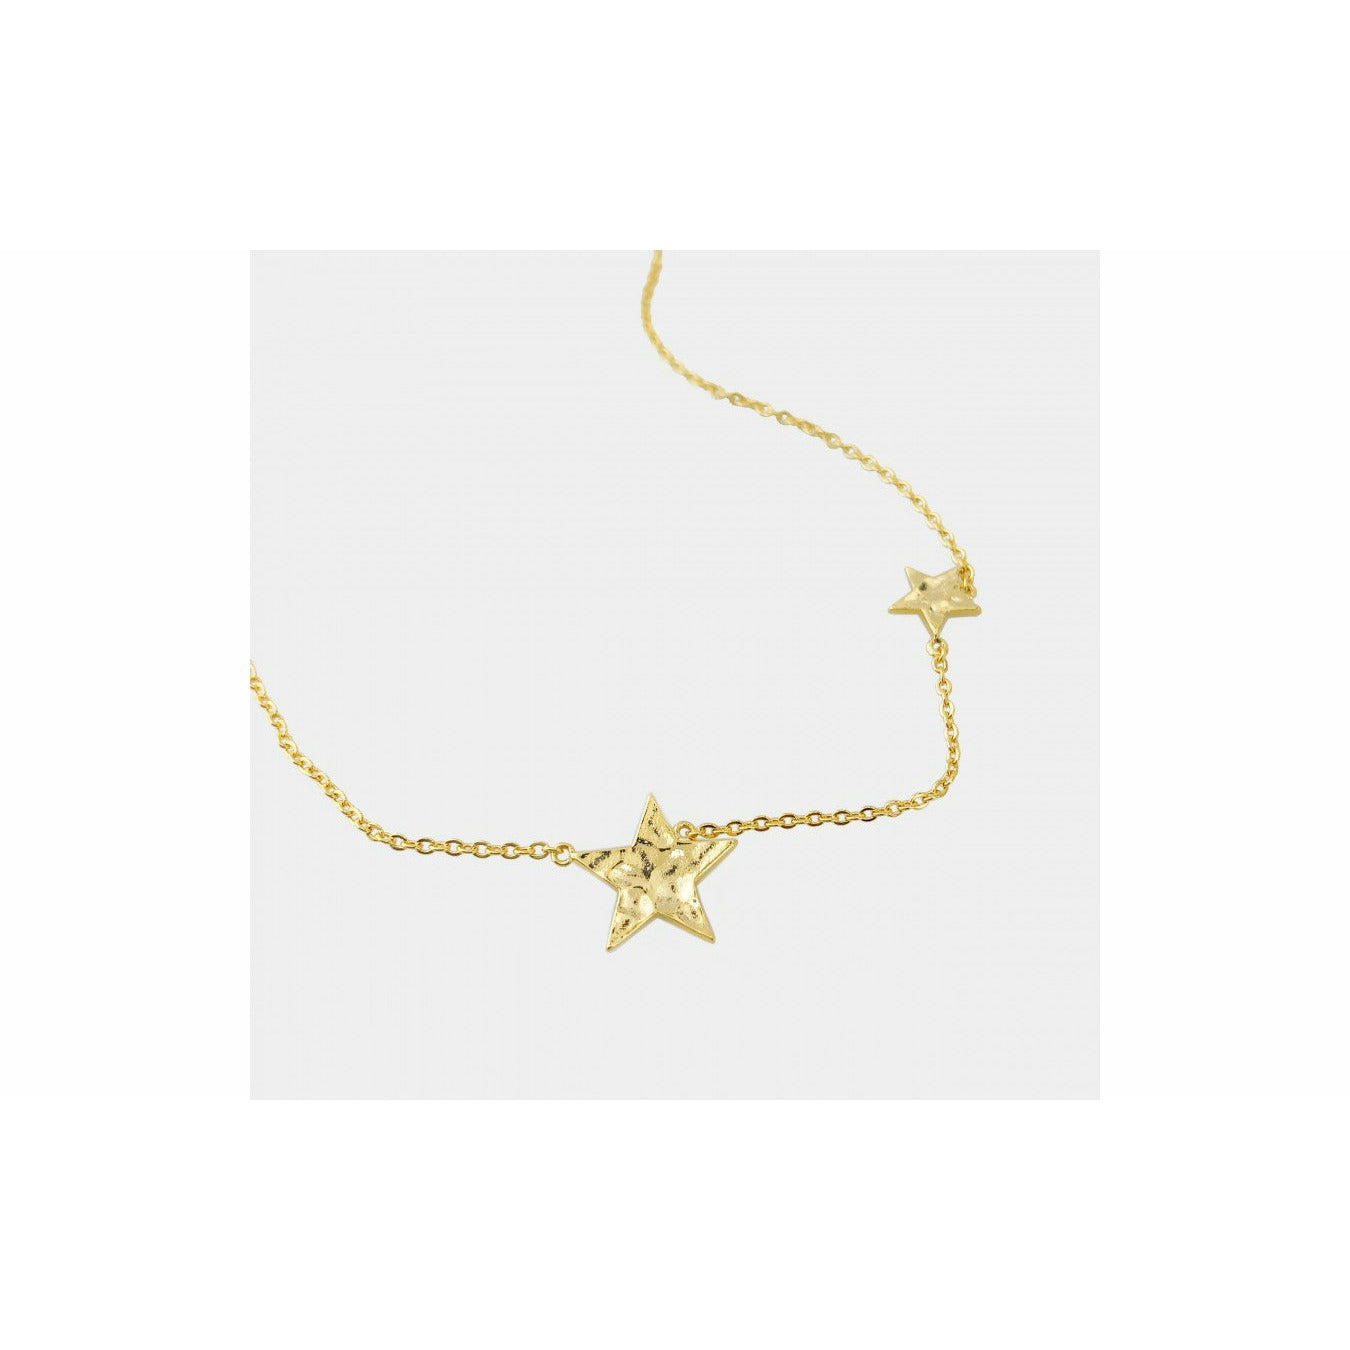 Patterned Stars Necklace in Gold Tone